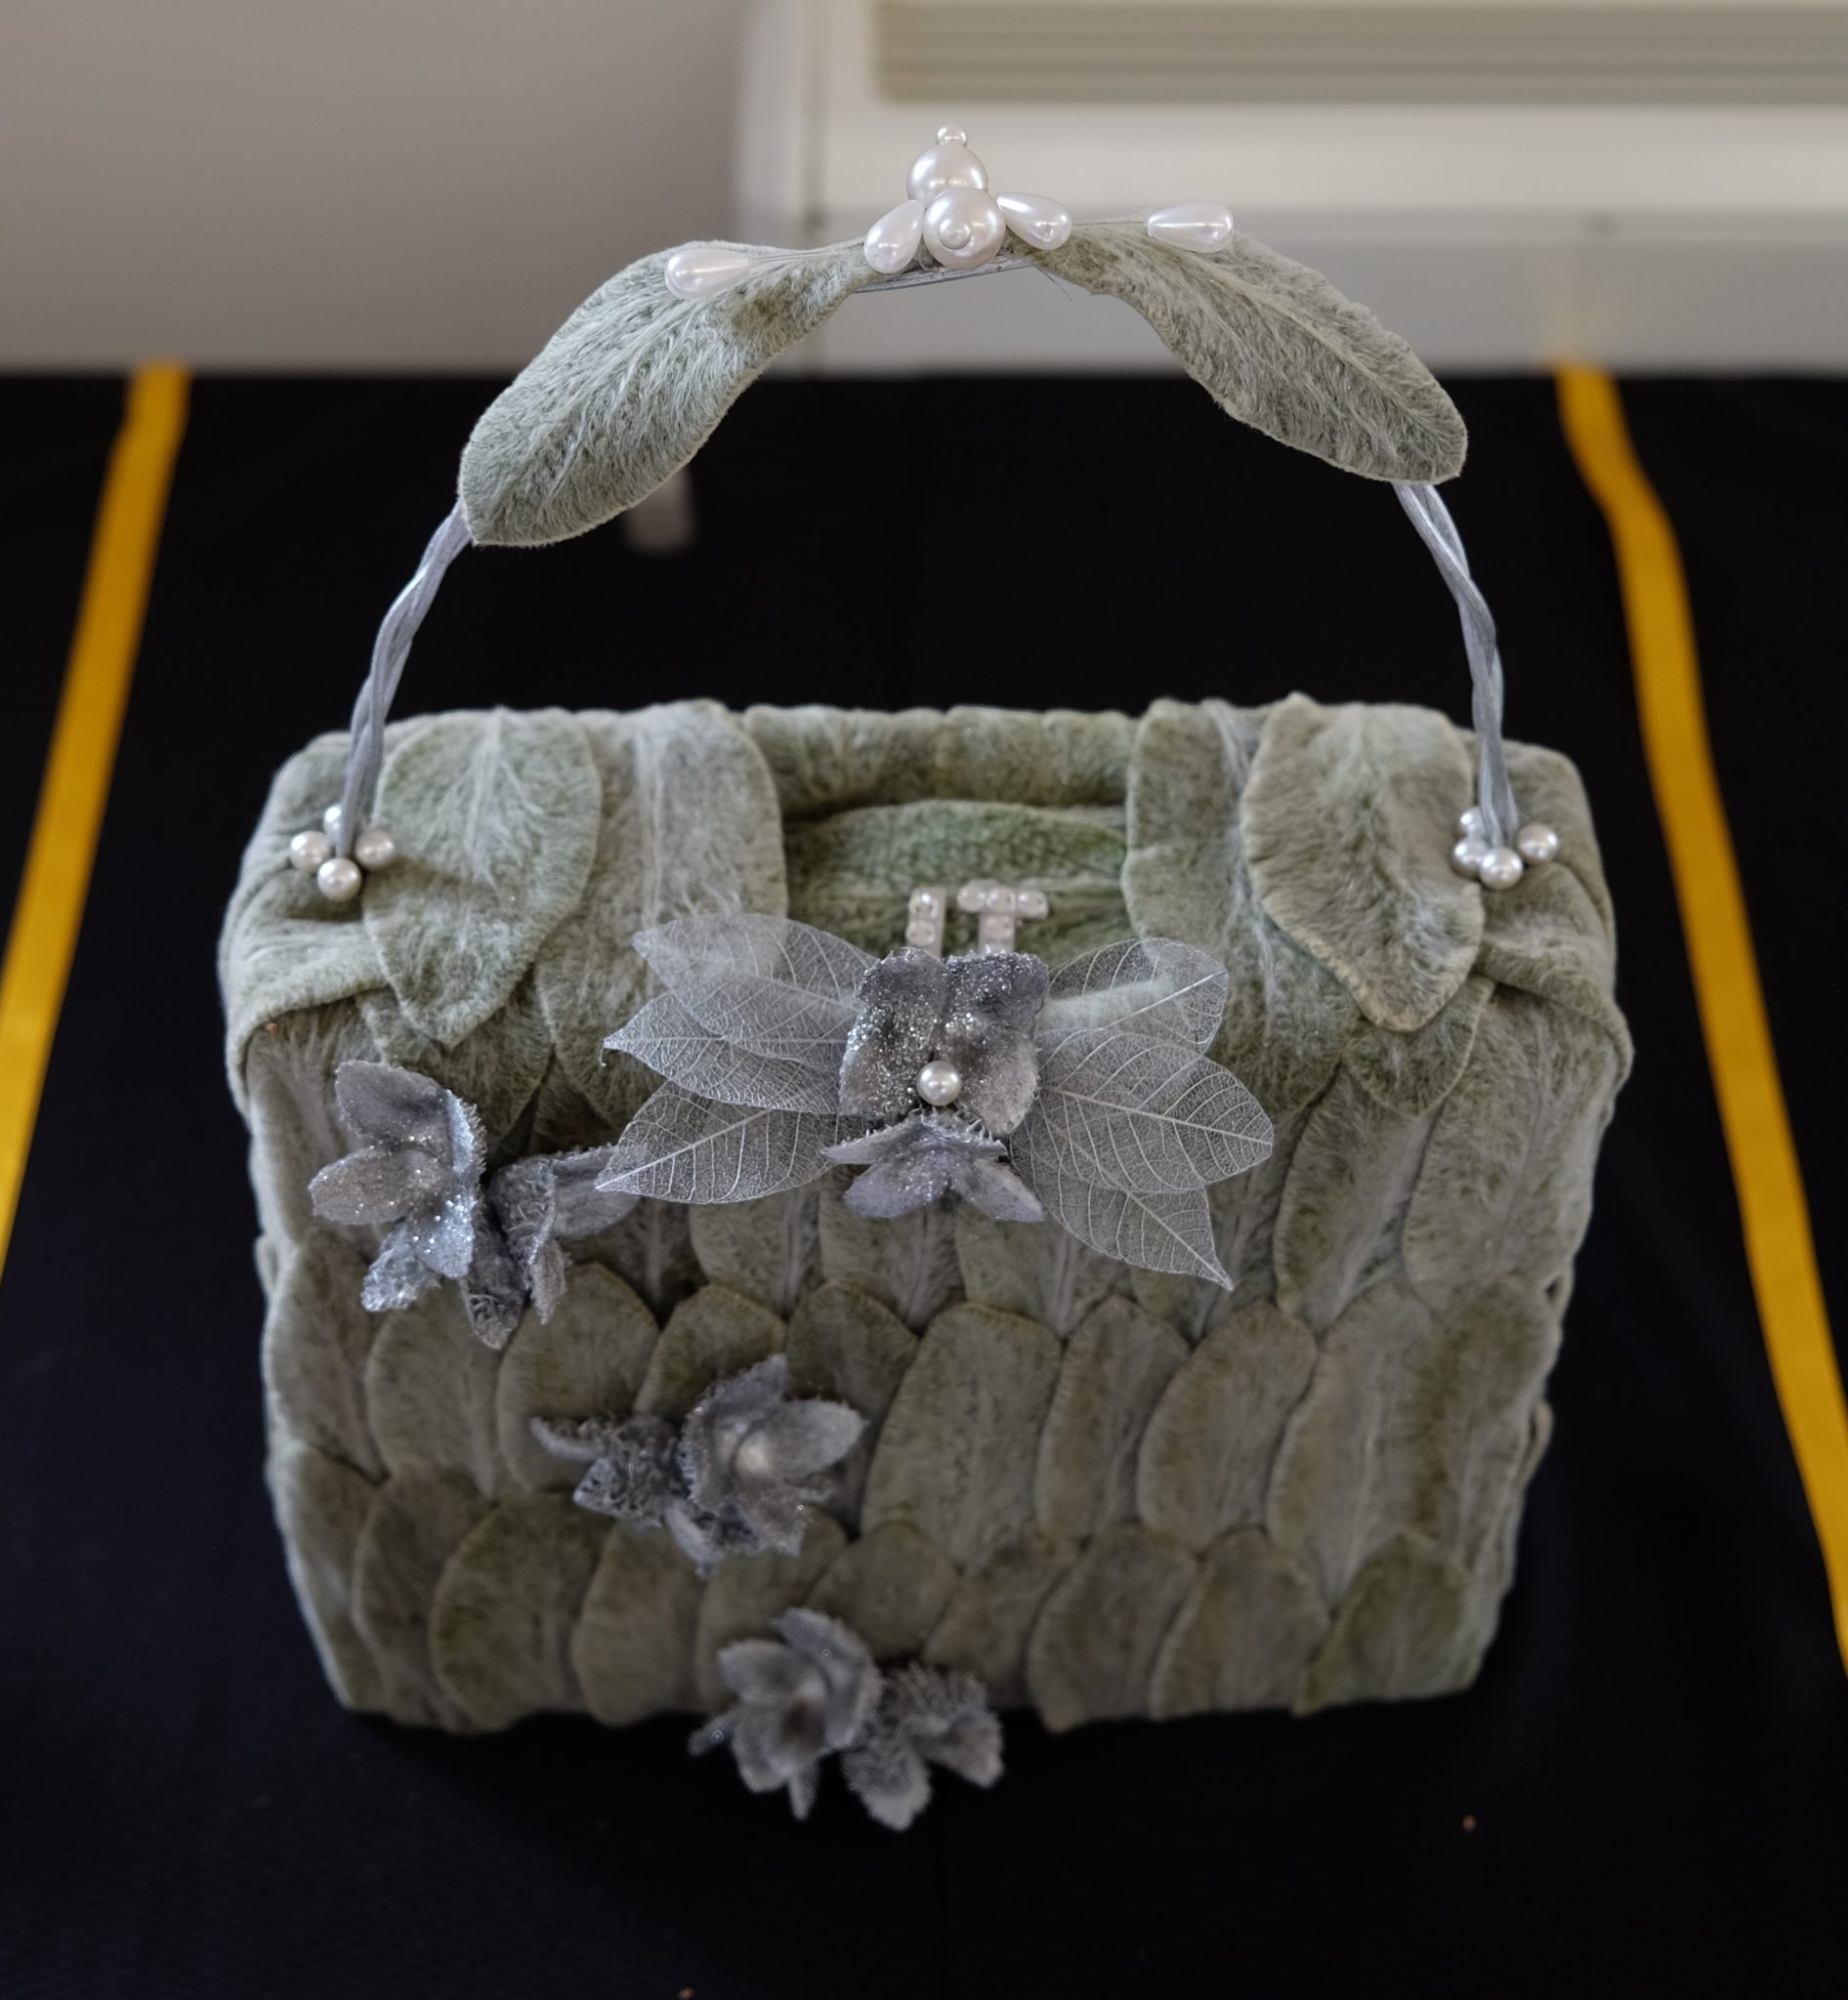 1st Prize - Class 8 It's in the Bag
Sheila Bendall - Bere Regis